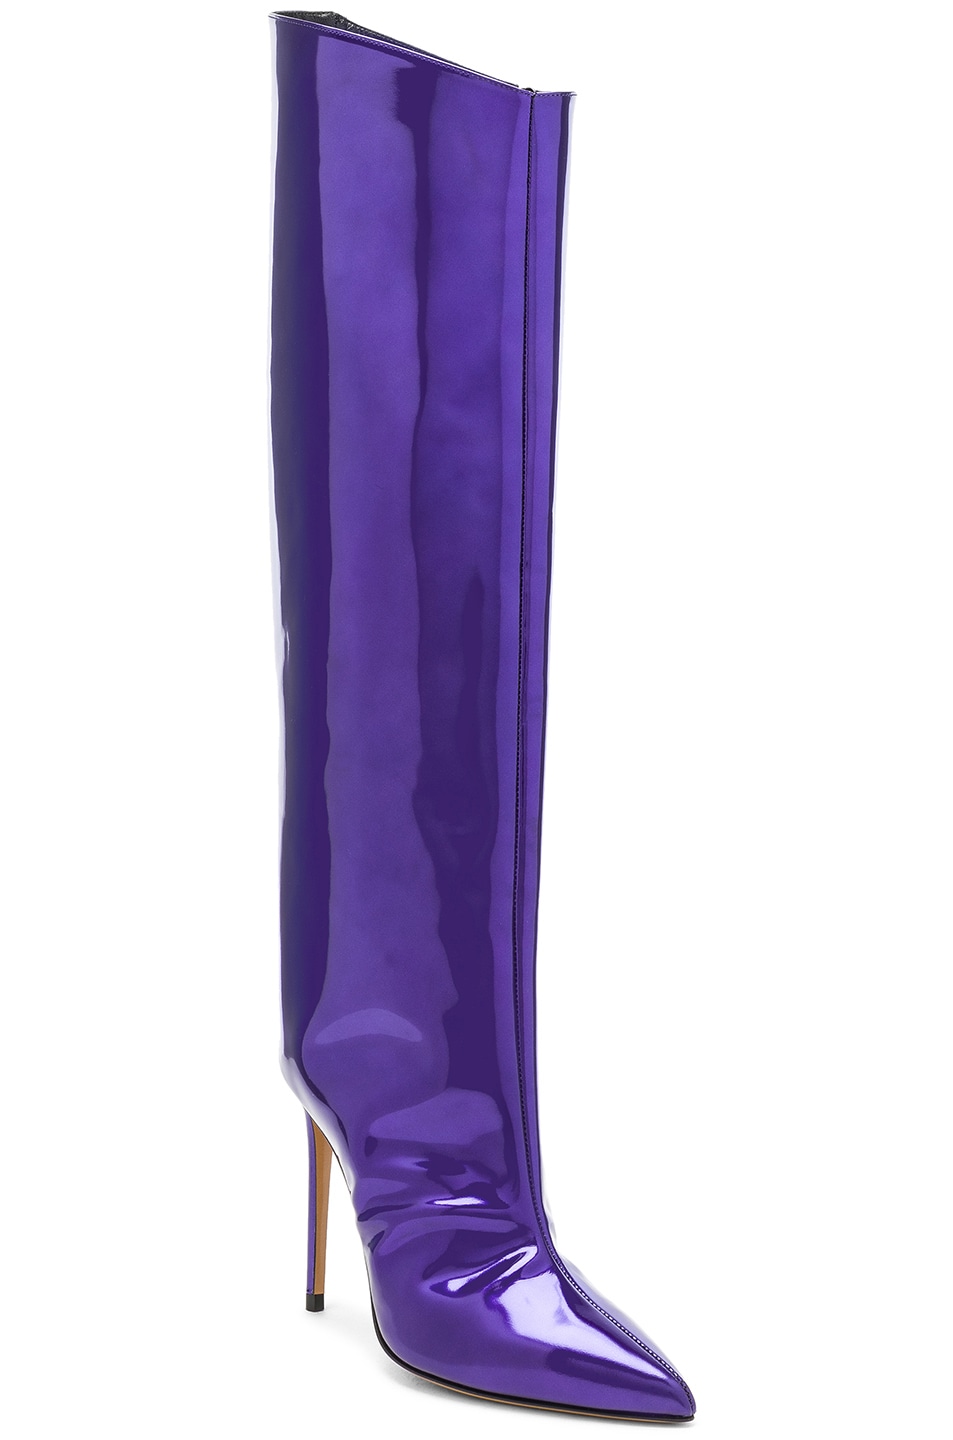 Alexandre Vauthier Alex Patent Knee High Boots in Pearly Purple | FWRD